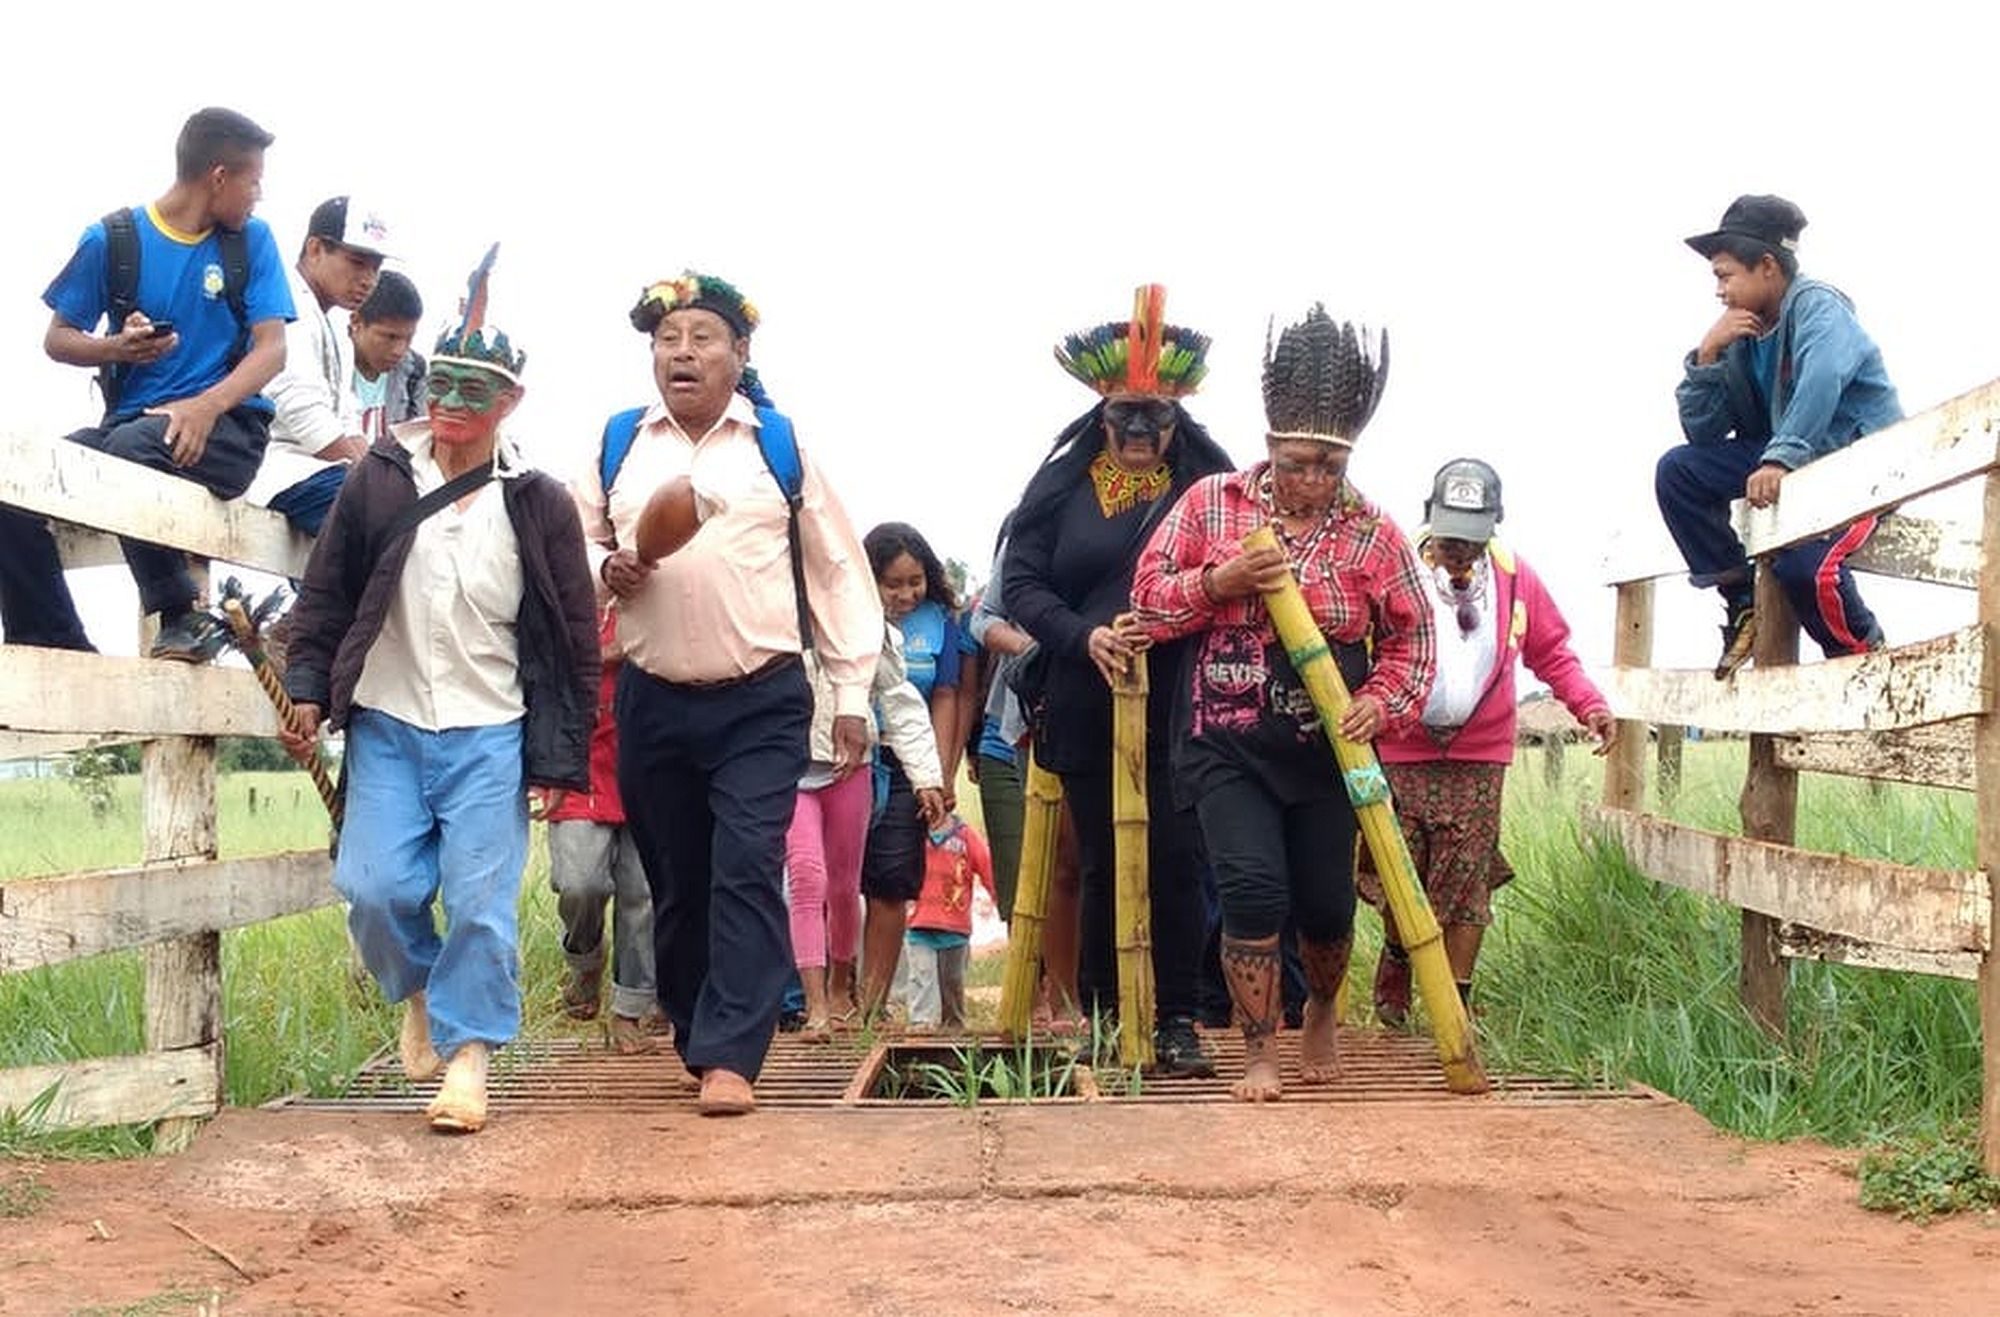 Kaiowá and Guarani protecting their lands on a possible eviction day, March 2018. Author provided